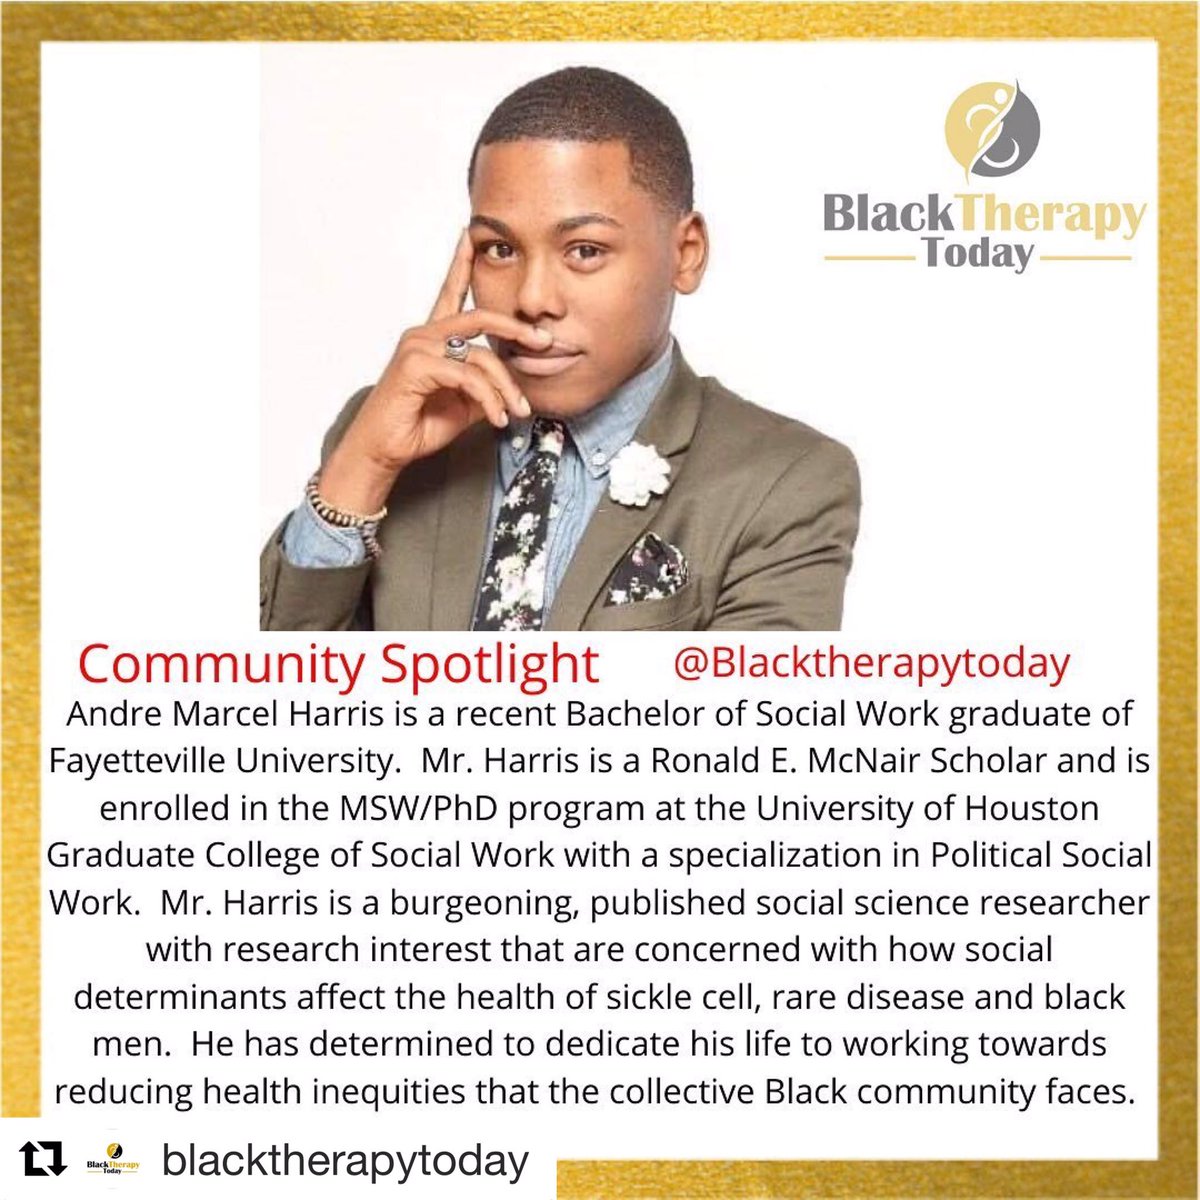 #Repost 
・・・
Today we are putting our #communityspotlight on André Marcel Harris who is doing amazing things in the Health and Social Work space. Keep up the great work. 

#blacktherapytoday #blacklivesmatter #BlackMenInPublicHealth #BlackMenInSocialWork #SickleCellAdvocate